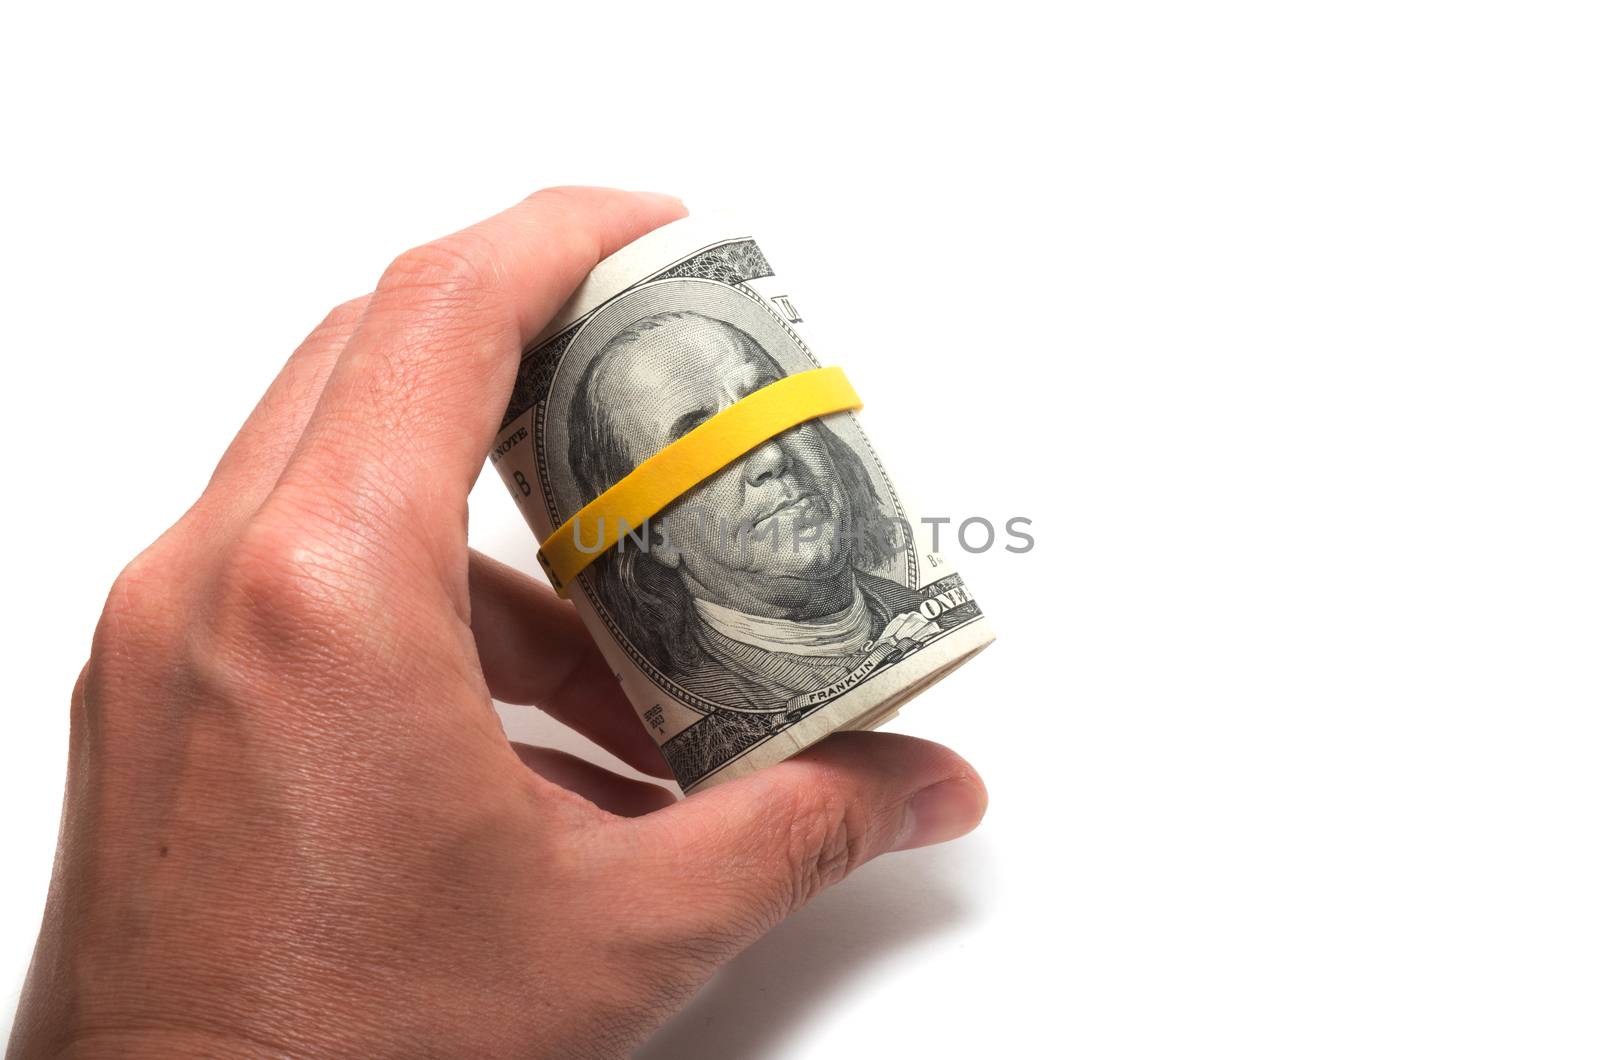 Roll of us banknotes with 100 dollars at the surface by daoleduc